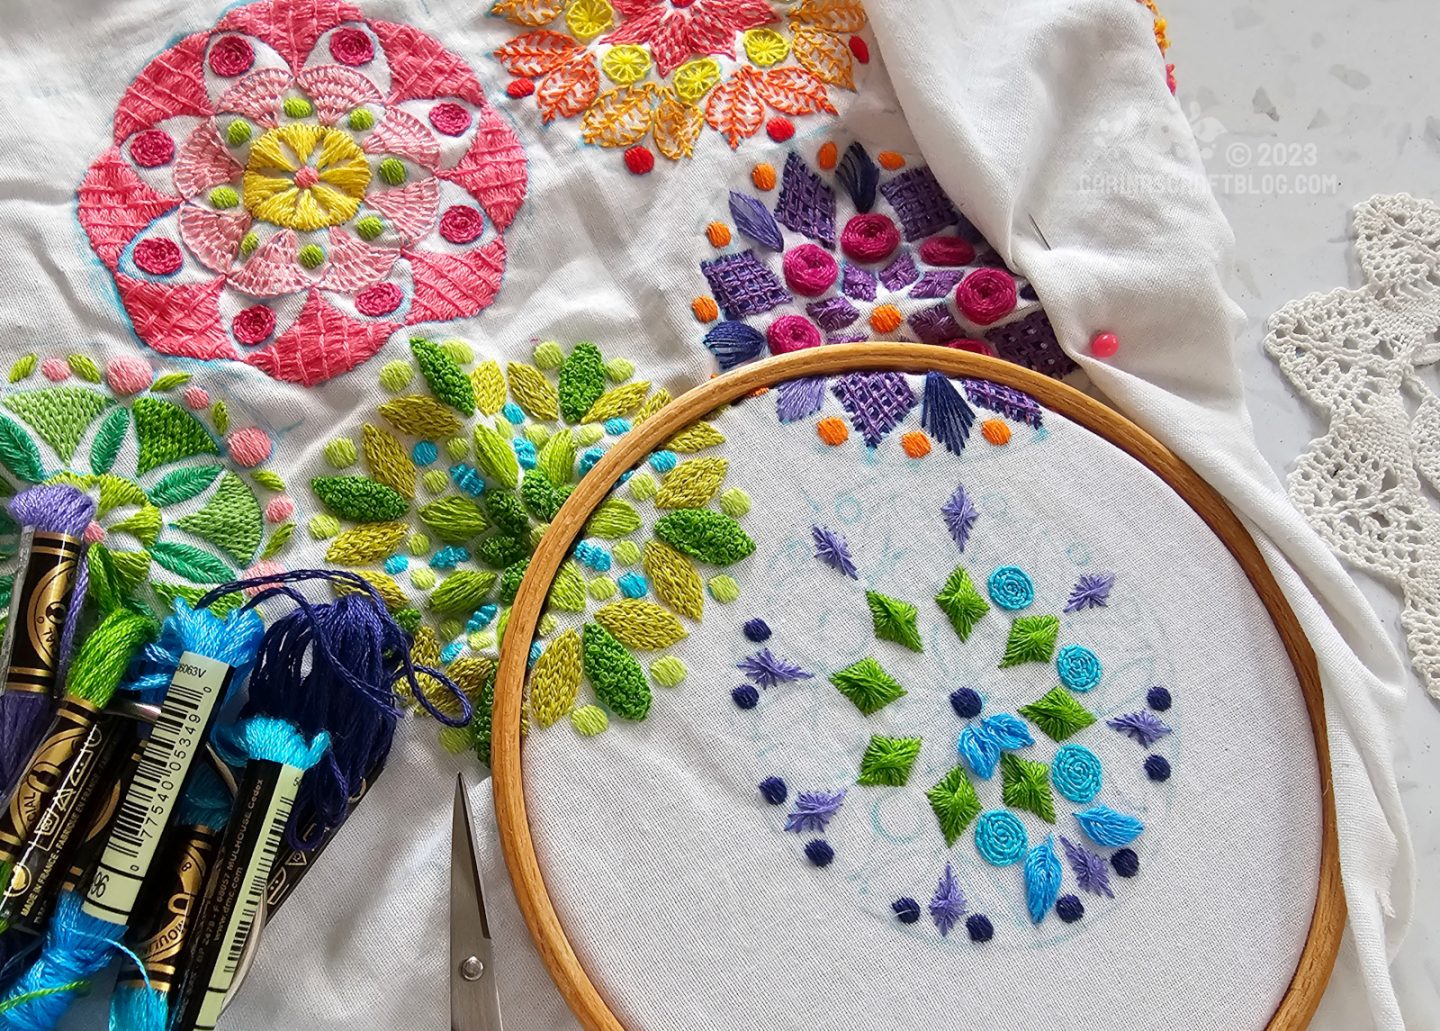 Close overhead view of white fabric part of white is stretched in a wooden hoop. In the hoop is a half finished mandala inspired motif worked in green and blue colours. Partially obscured by folds in the fabric are similar designs stitched in multiple colours.